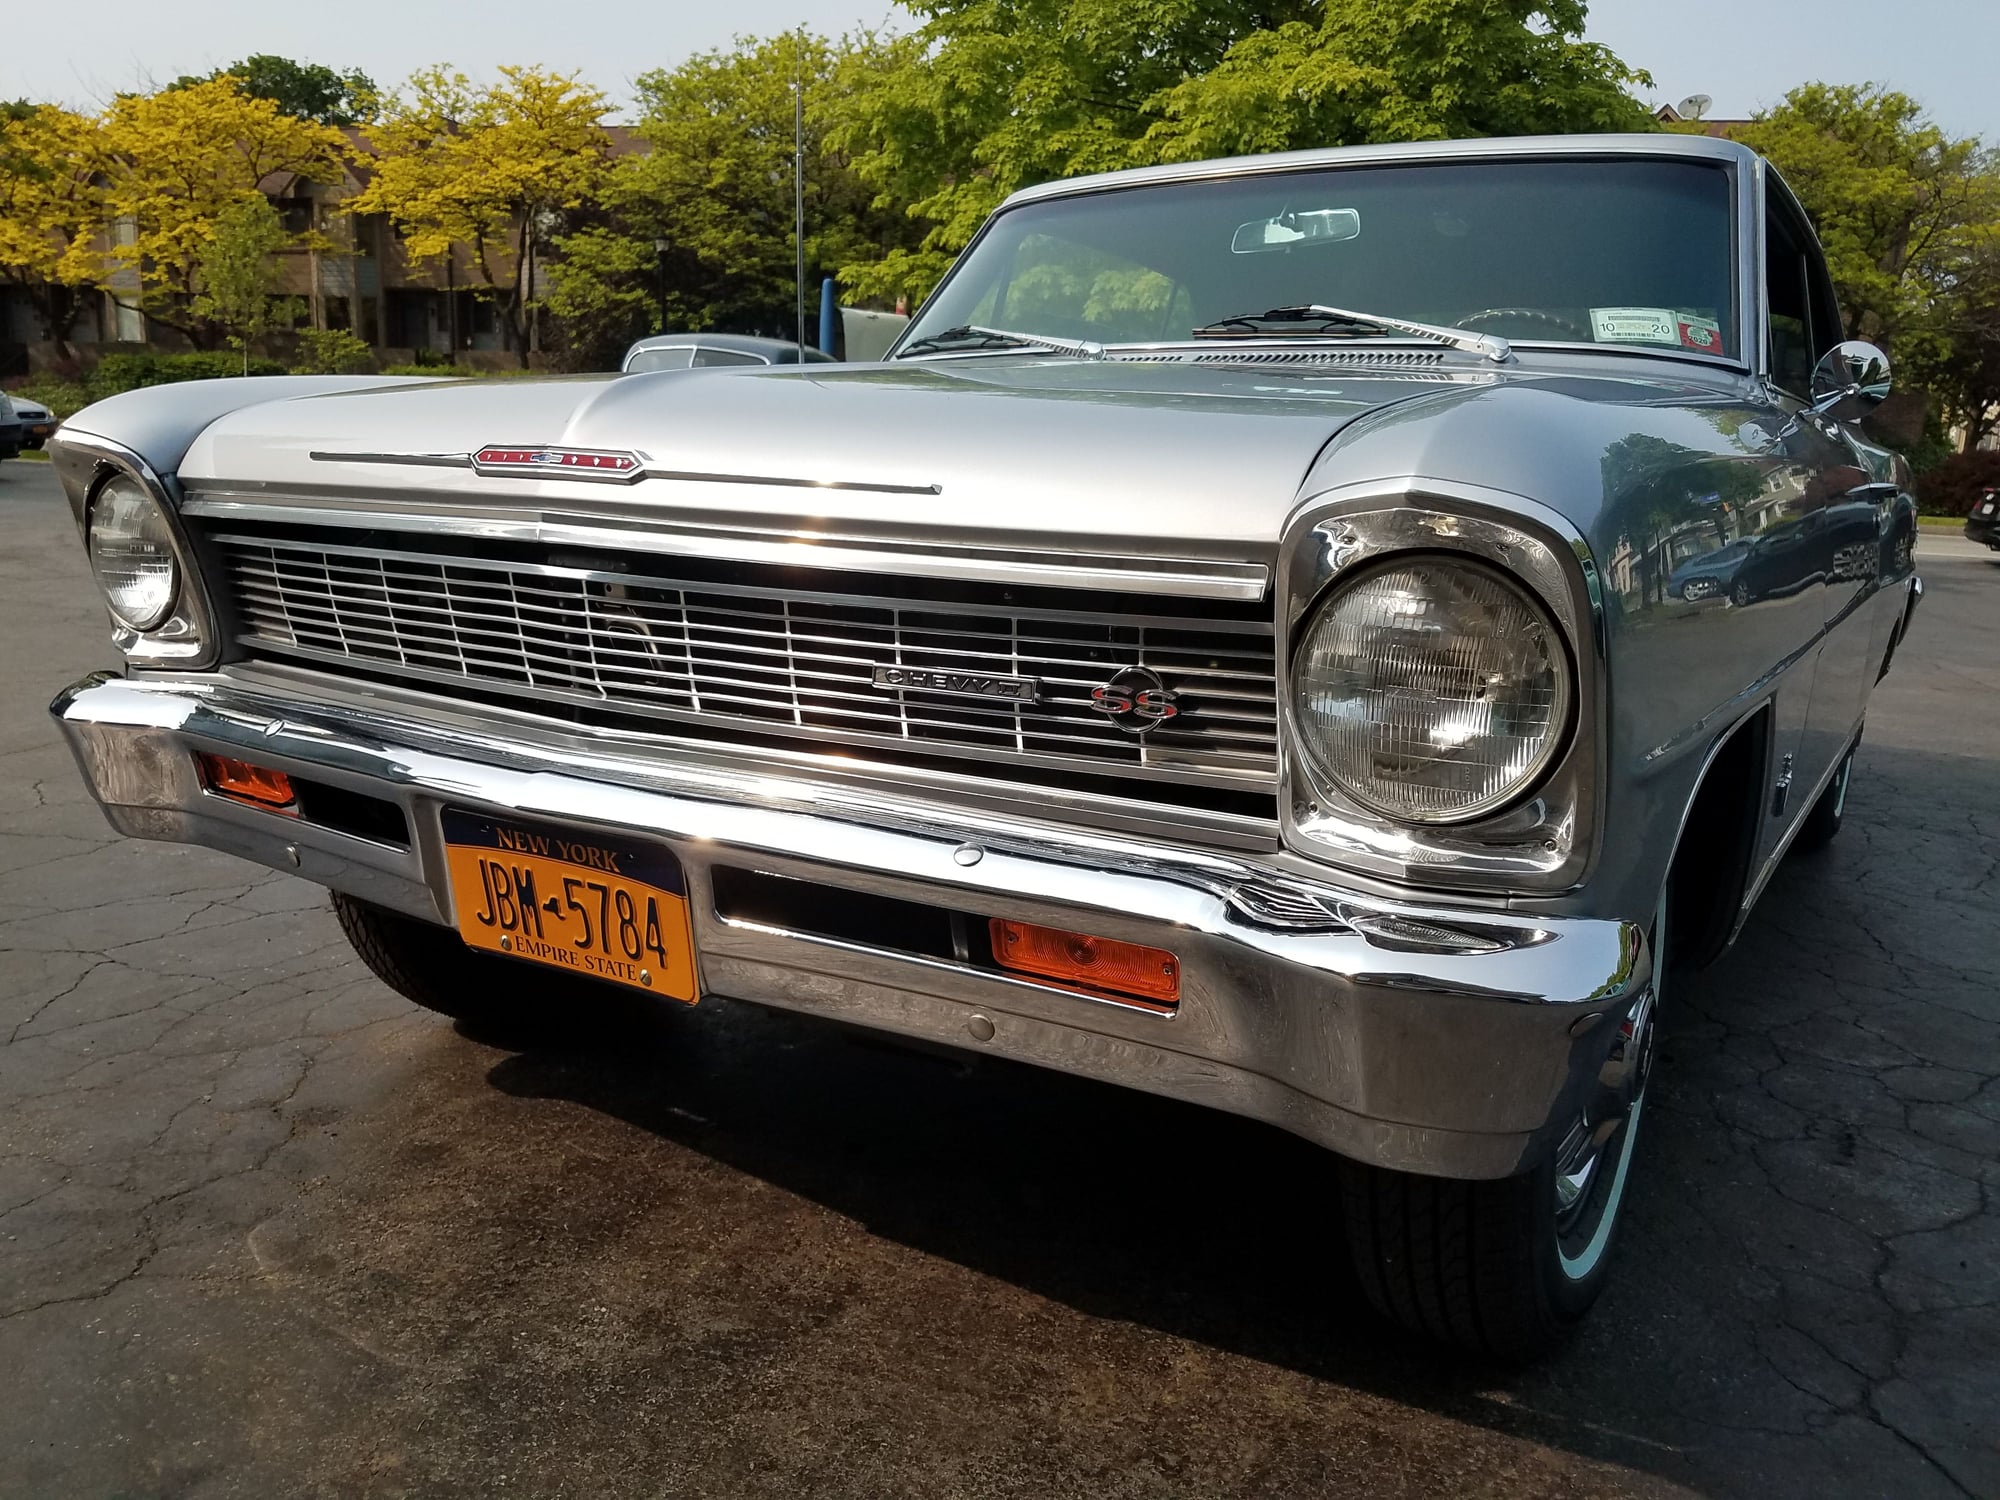 1966 Chevrolet Chevy II - 1966 Nova SS "L79 Clone" - Used - VIN 6611837NOR99209 - 75,839 Miles - 8 cyl - 2WD - Manual - Coupe - Silver - Rochester, NY 14609, United States